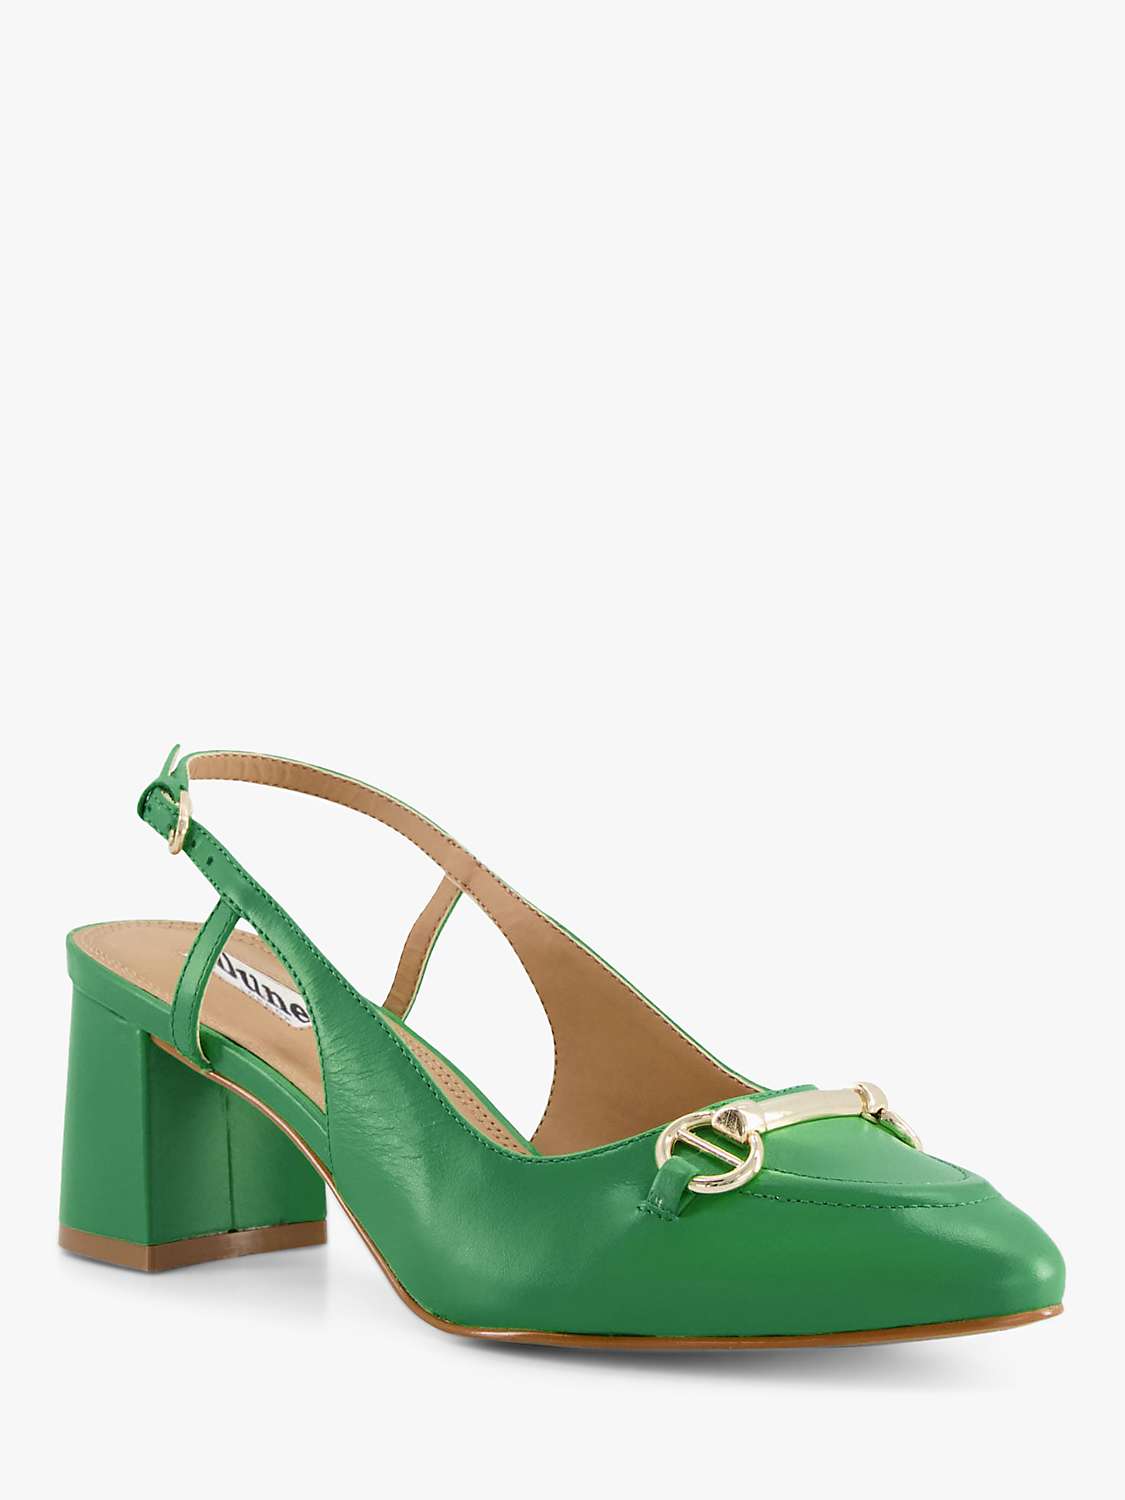 Dune Cassie Leather Slingback Court Shoes, Green at John Lewis & Partners